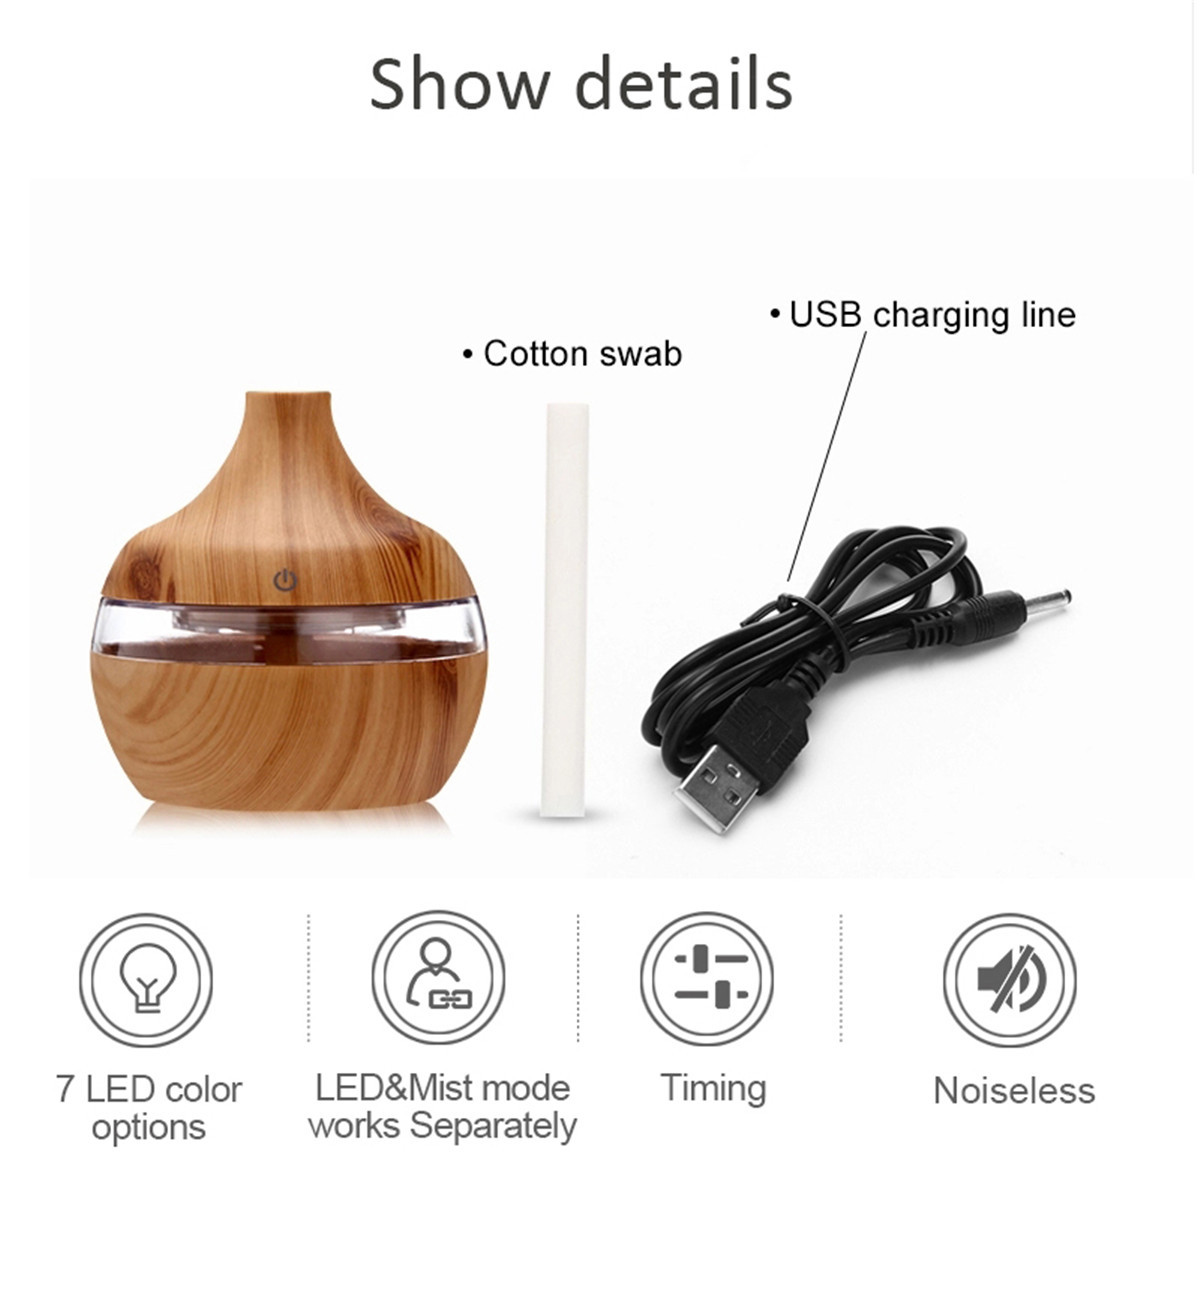 300ml-Electric-Ultrasonic-Air-Mist-Humidifier-Purifier-Aroma-Diffuser-7-Colors-LED-USB-Charging-for--1761154-11